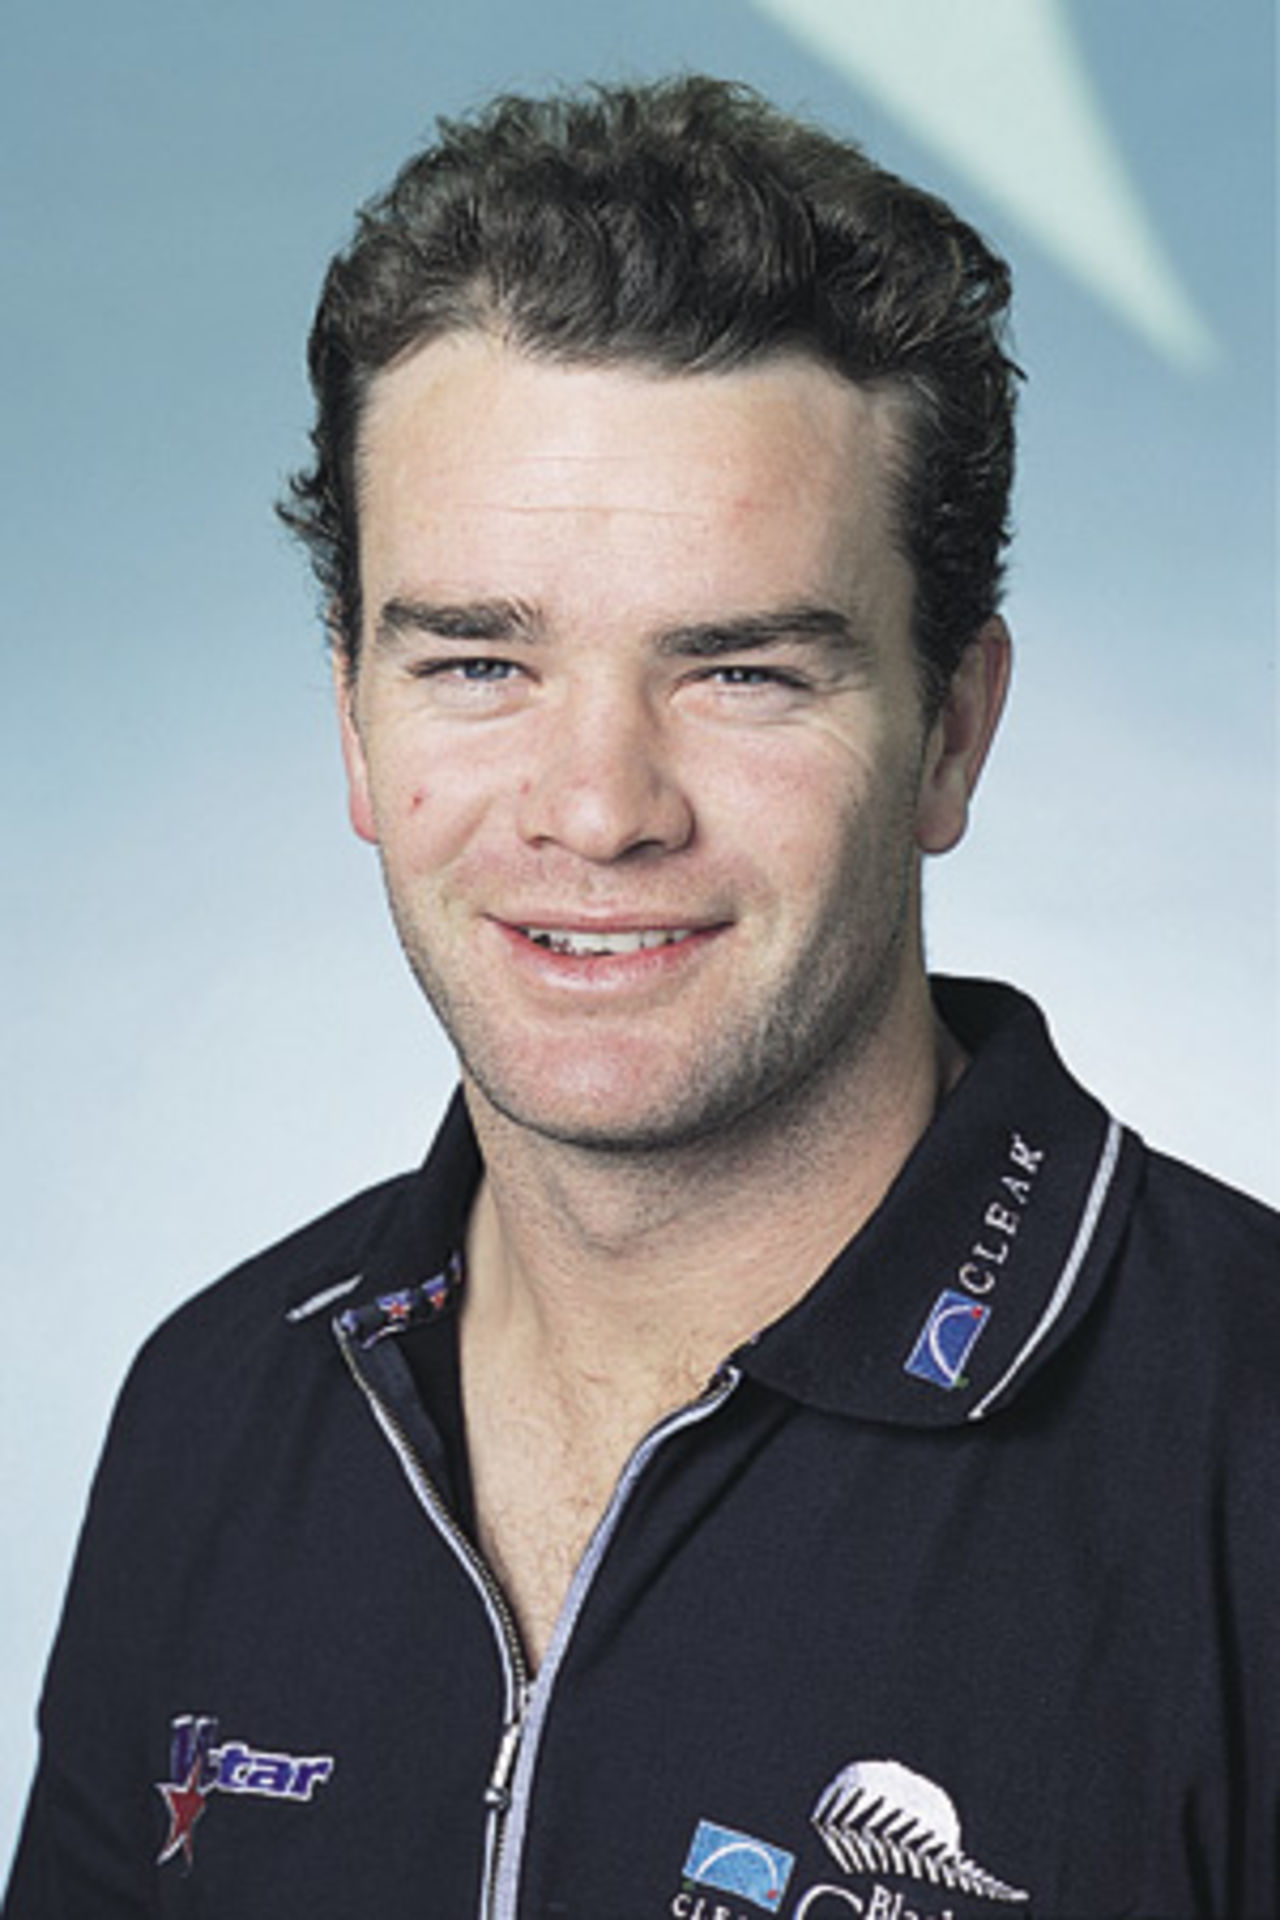 Portrait of Dion Nash - New Zealand player in the 2001/02 season.